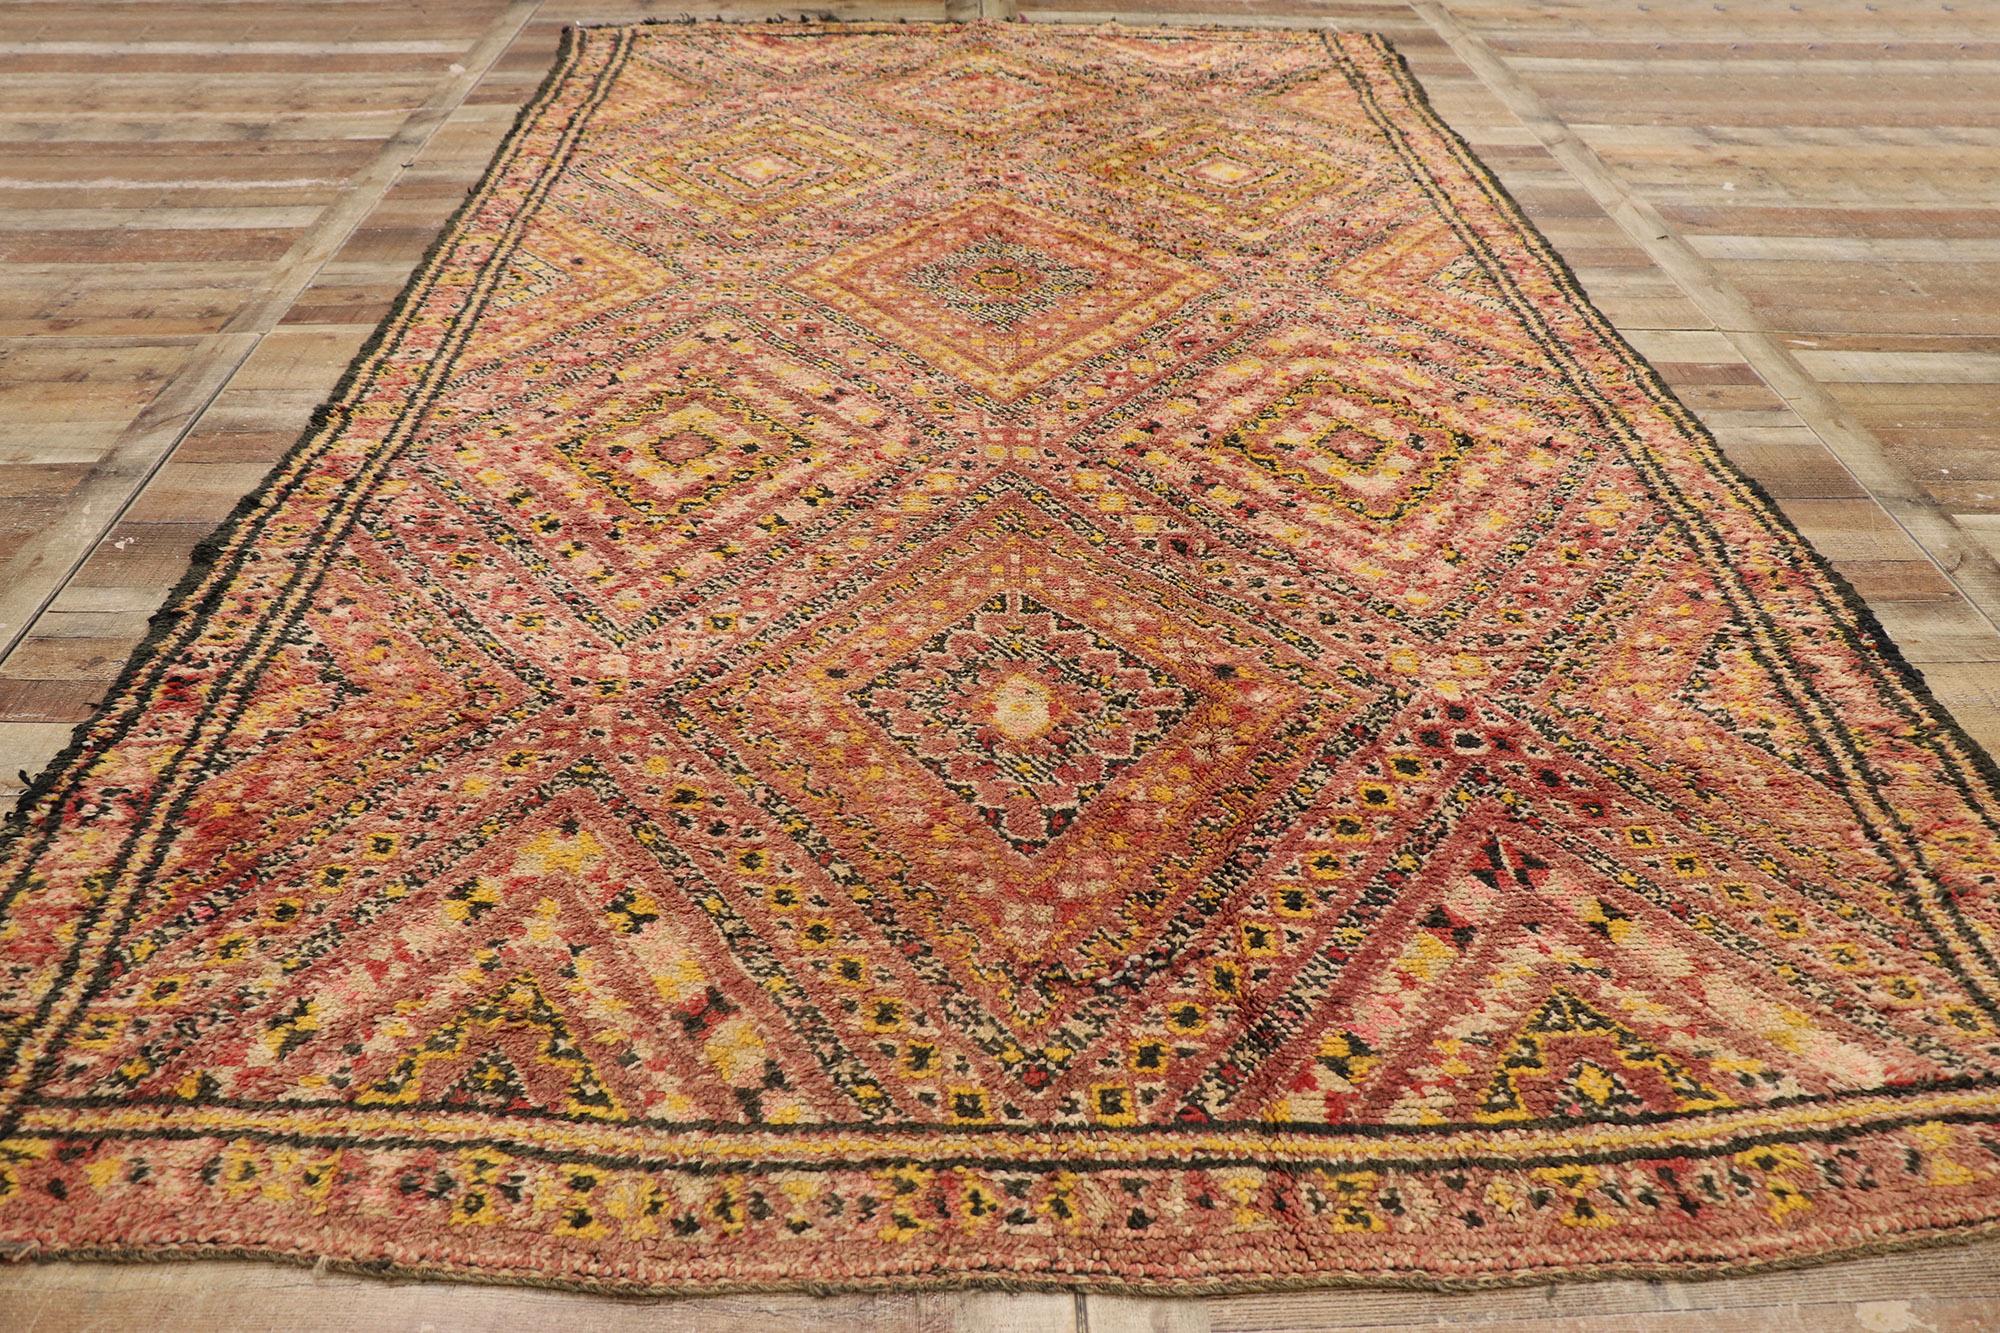 Vintage Berber Beni M'Guild Moroccan Rug with Mid-Century Modern Style For Sale 1